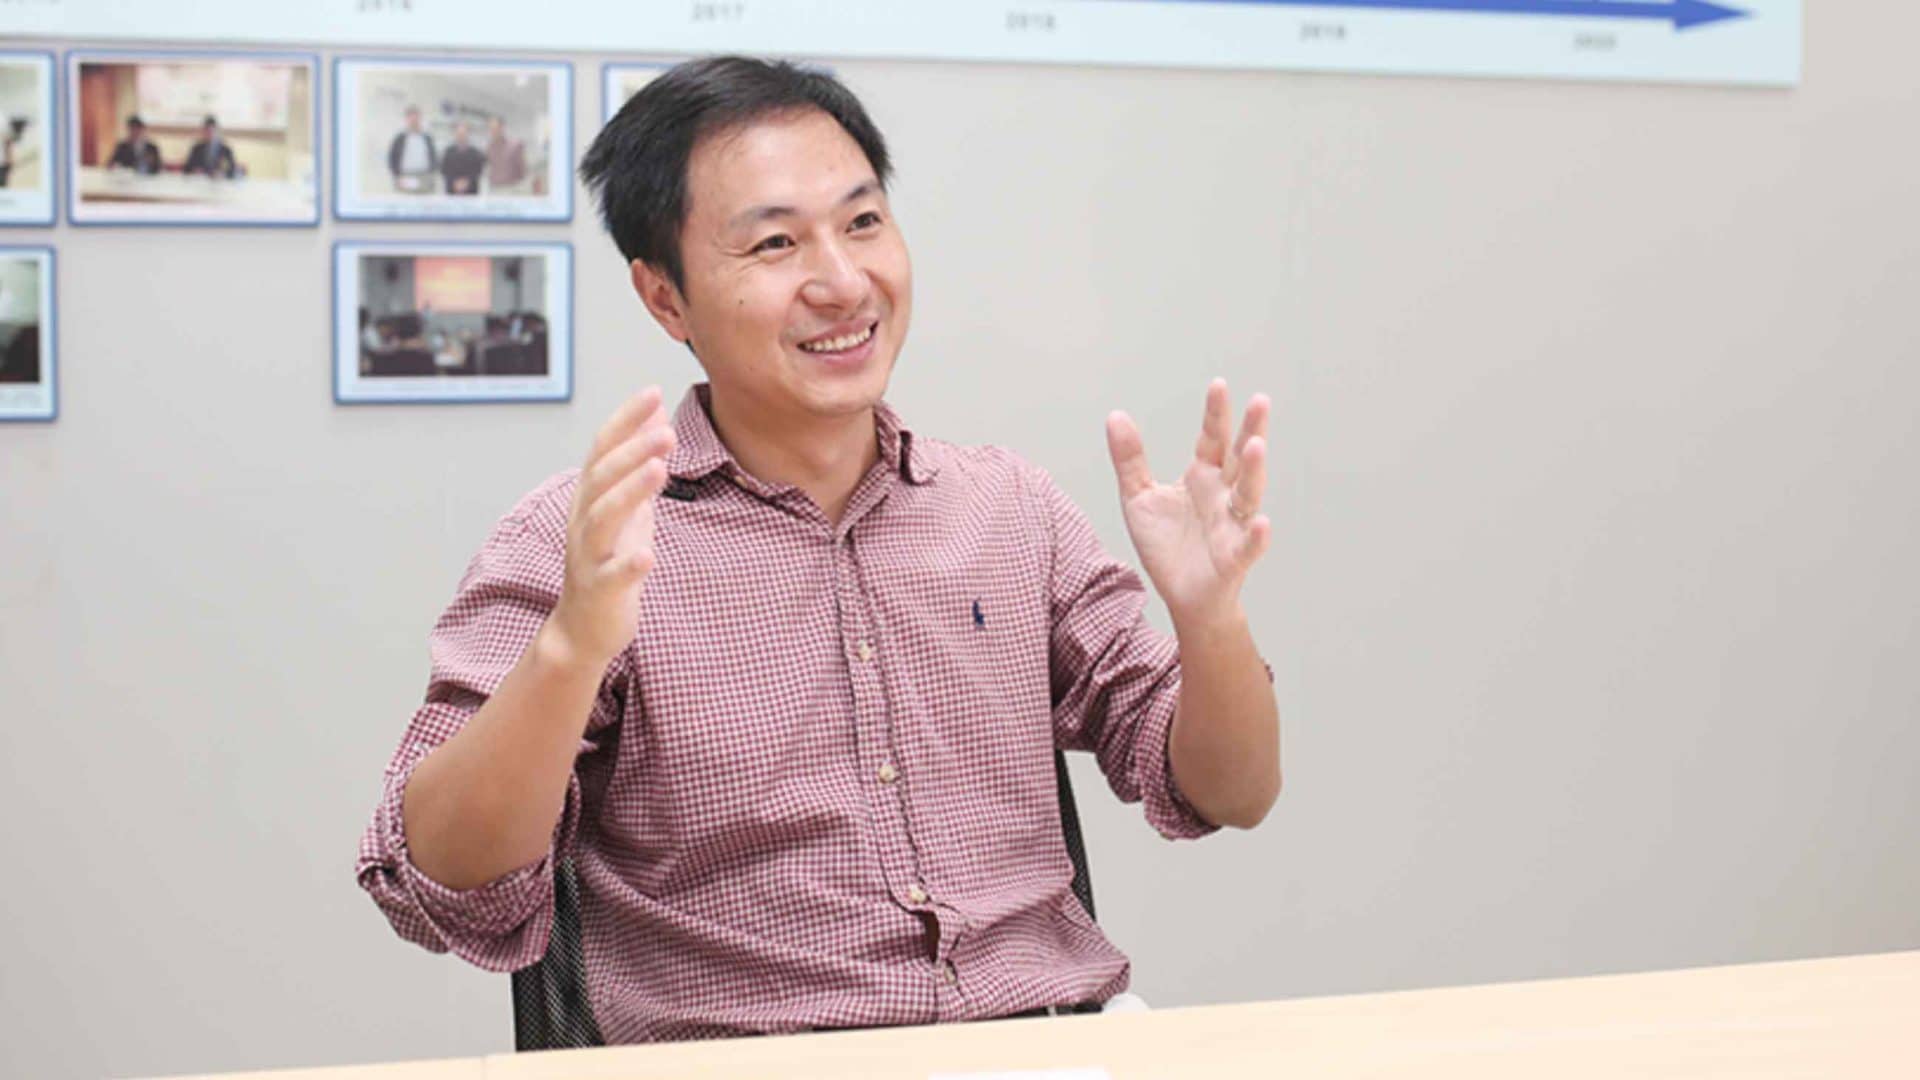 He Jiankui is interviewed by Chinese press on August 4, 2016. In January 2019, following his controversial gene-editing experiments, He was terminated from his position at the Southern University of Science and Technology in Shenzhen, in China’s Guandong province.